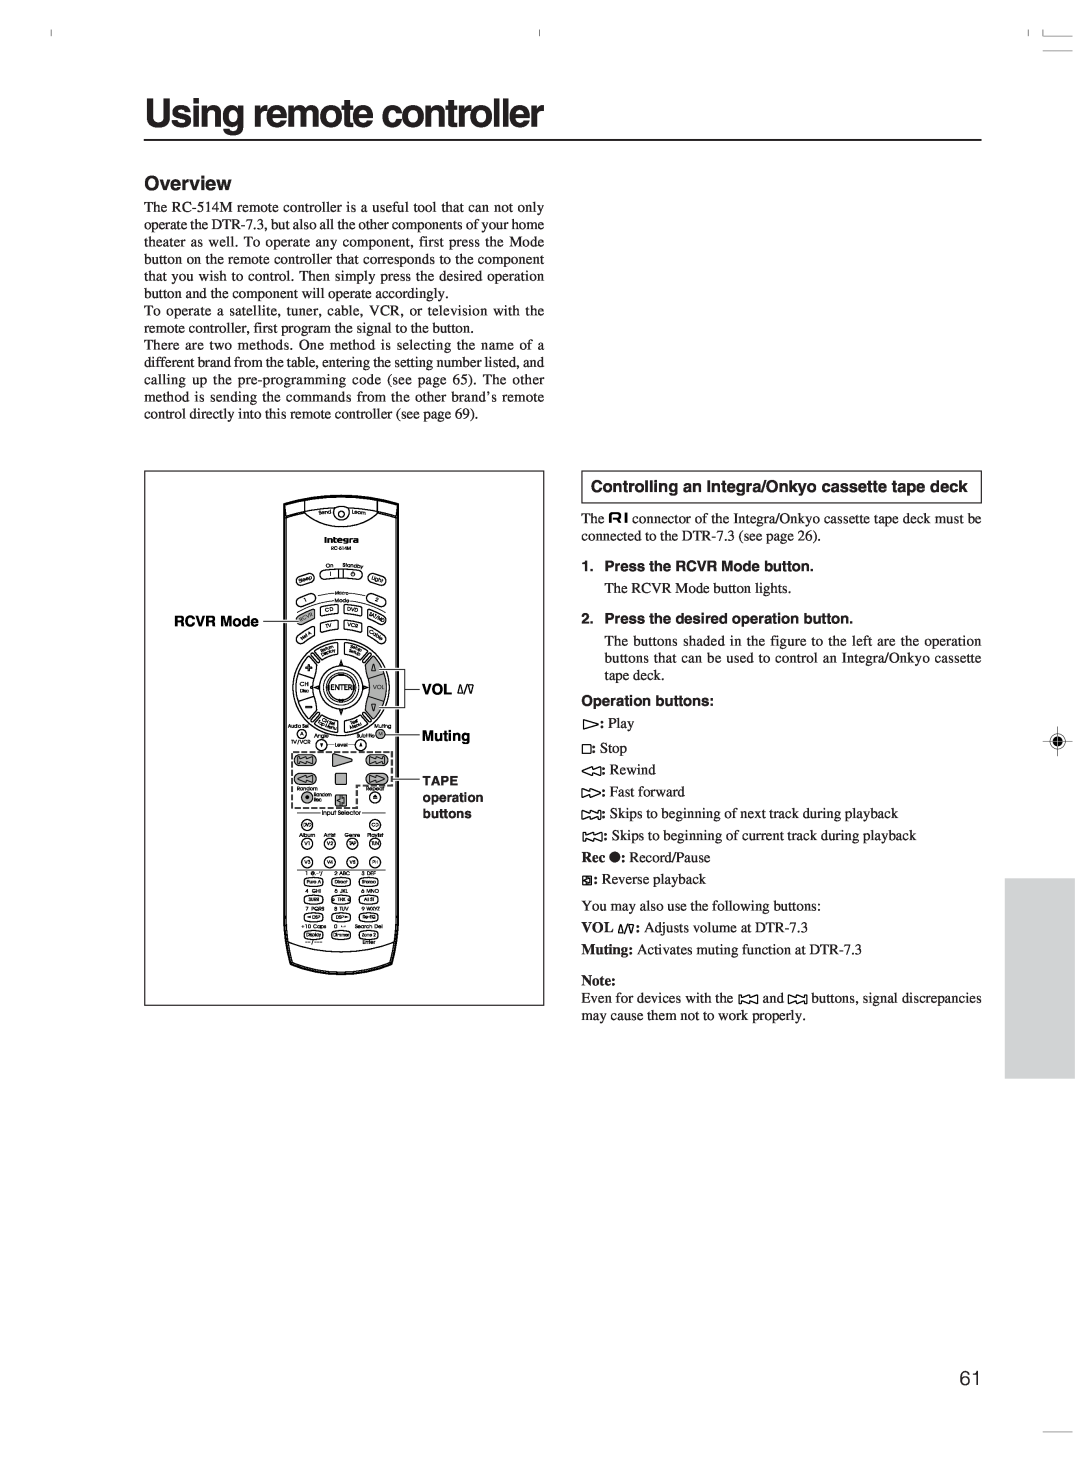 Integra DTR-7.3 instruction manual Using remote controller, Overview, Controlling an Integra/Onkyo cassette tape deck 